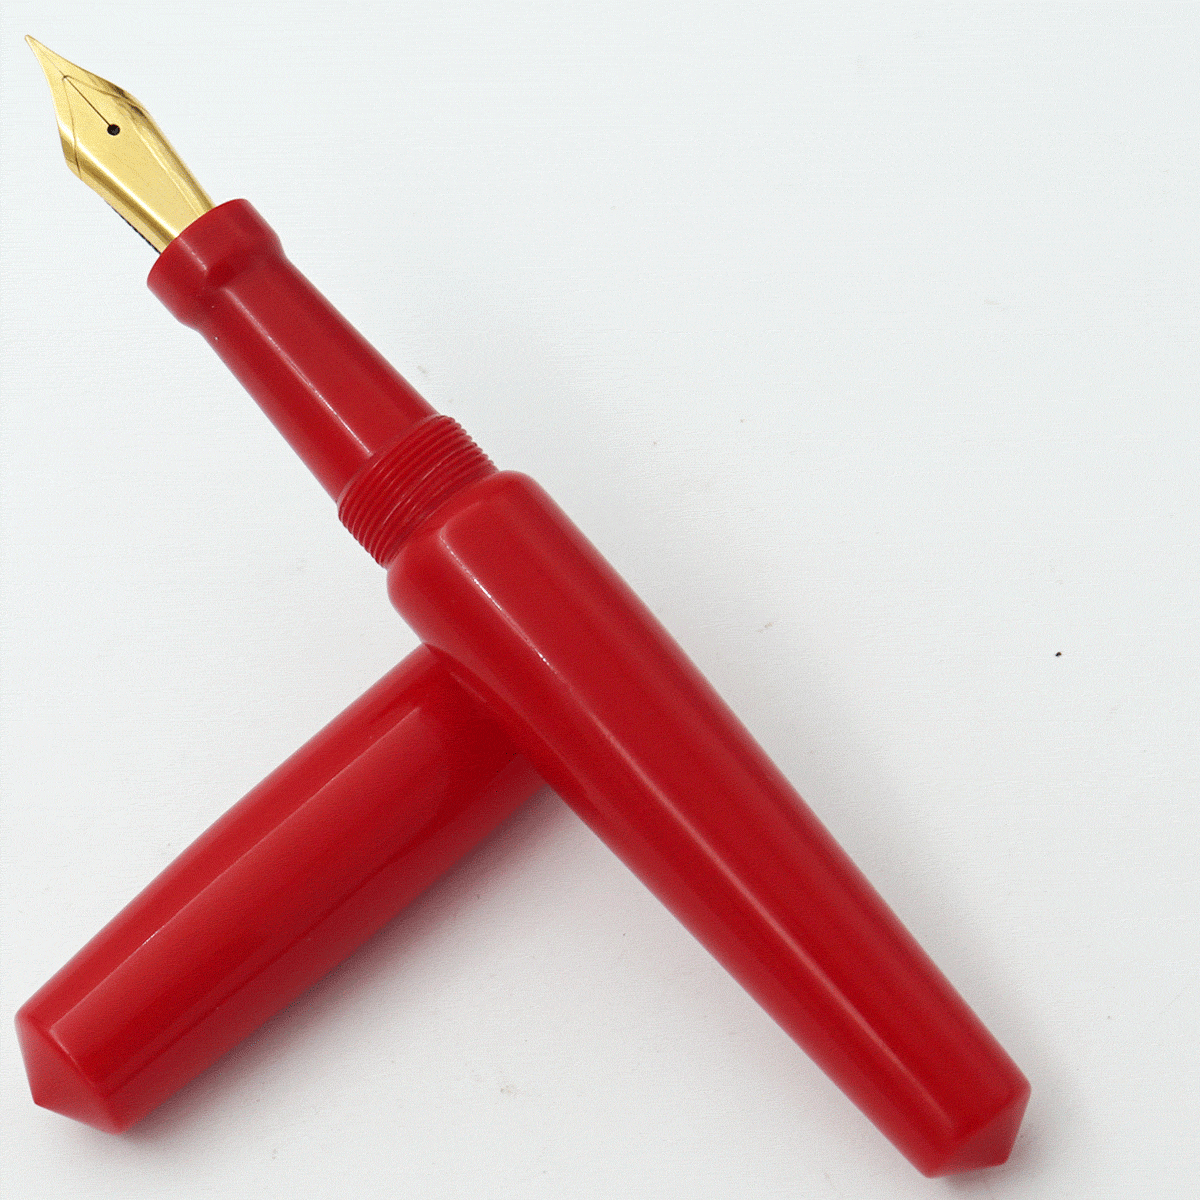 Ranga Handmade Abhimanyu Model Regular Acrylic R1 Solid Red Color Body And Without Clip German Jowo Nib Converter Type Fountain Pen (Nib Can be Customized With Fine or Medium or Broad) SKU 24284